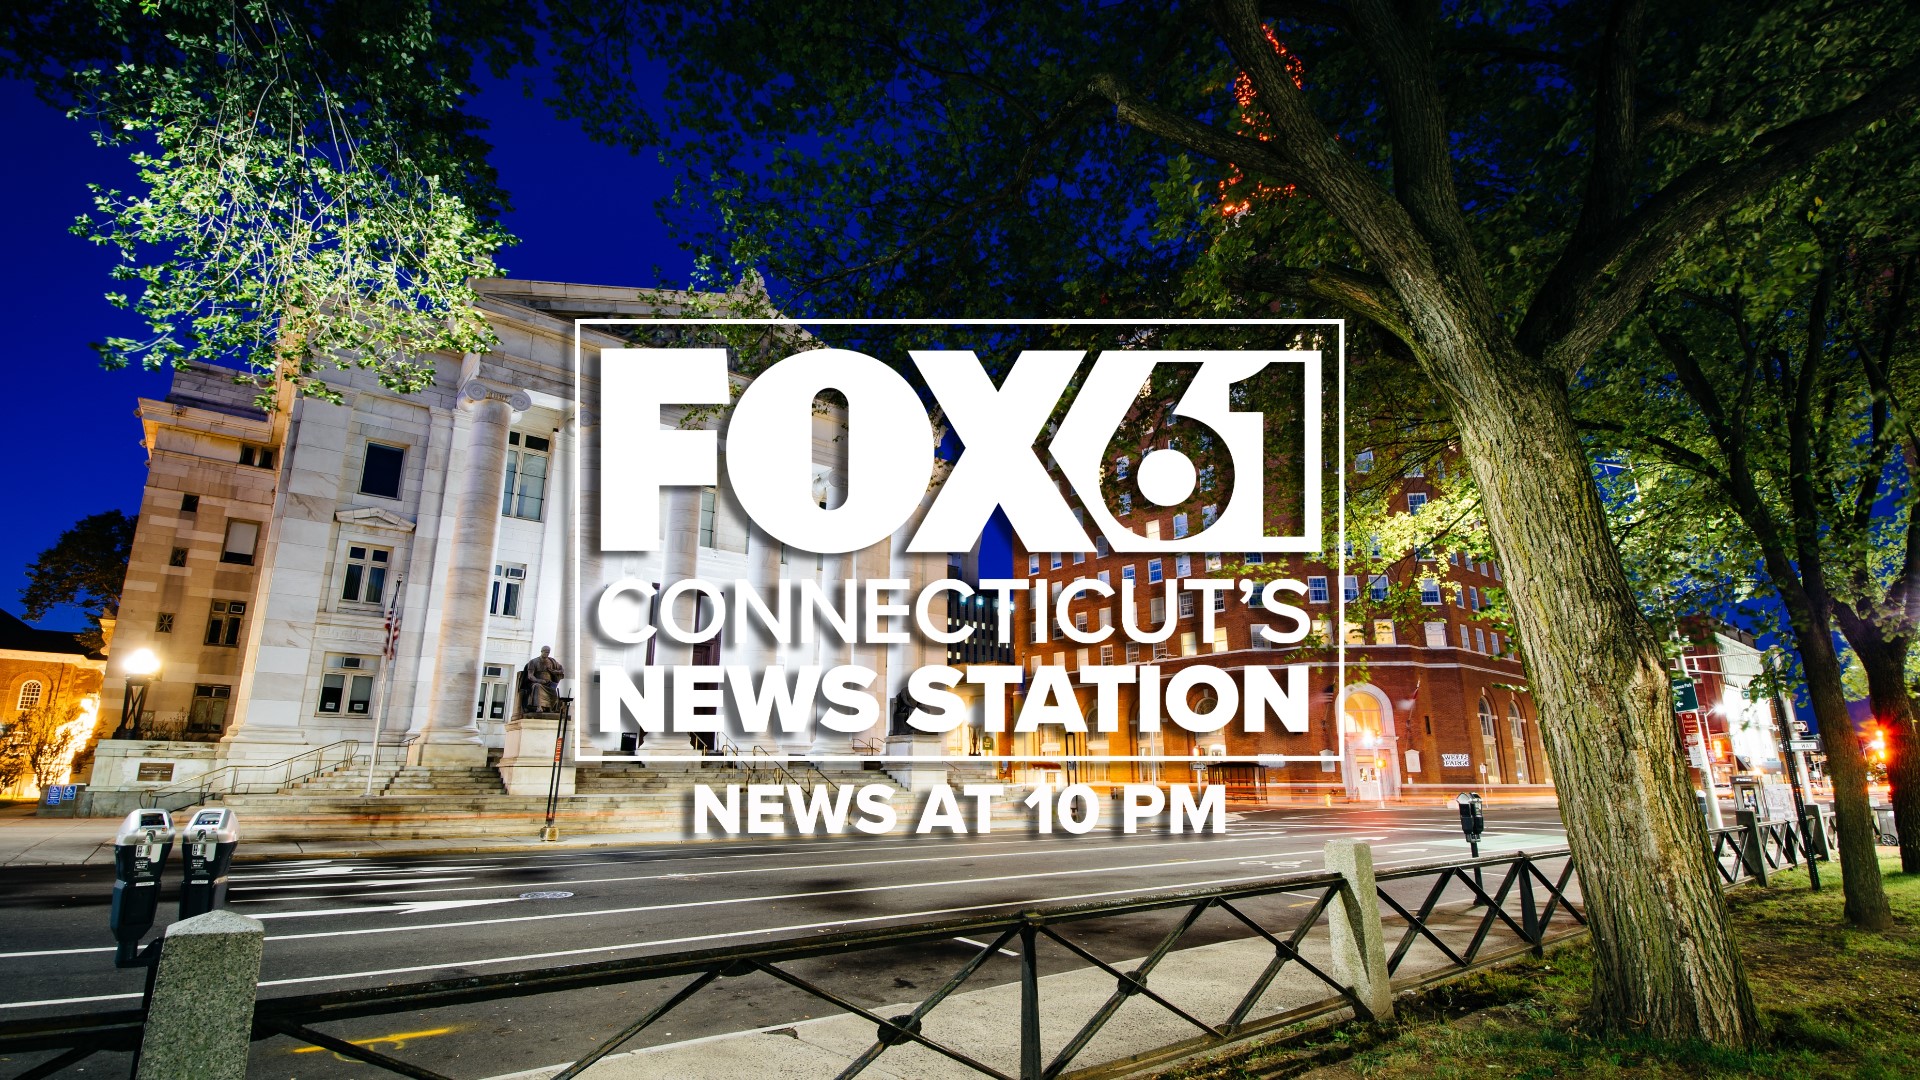 These are the top stories in Connecticut for May 25 at 10 p.m.